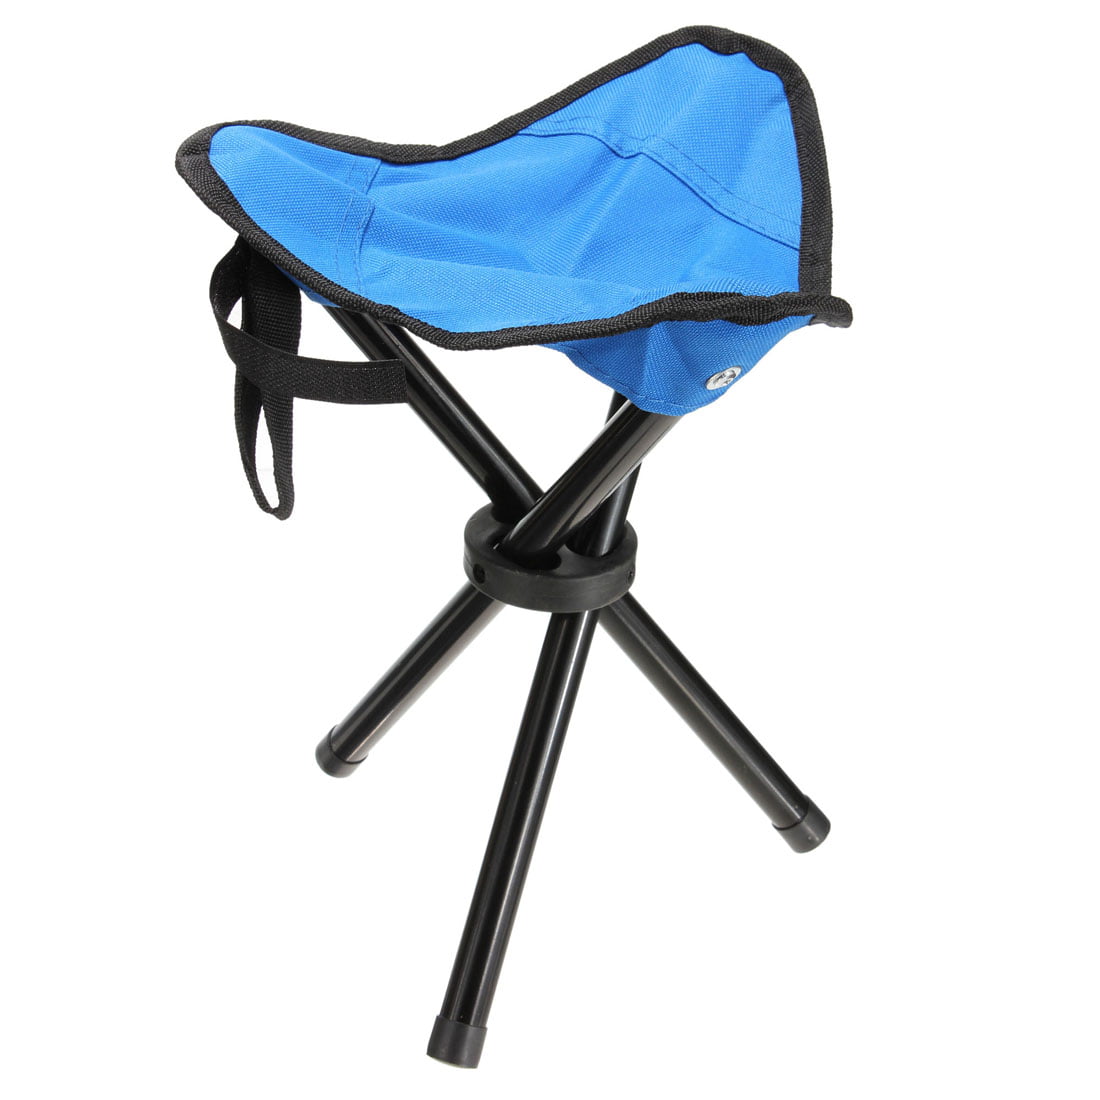 Portable Folding Stool,Outdoor Folding Chair for Camping,Fishing,Travel,Hiking 